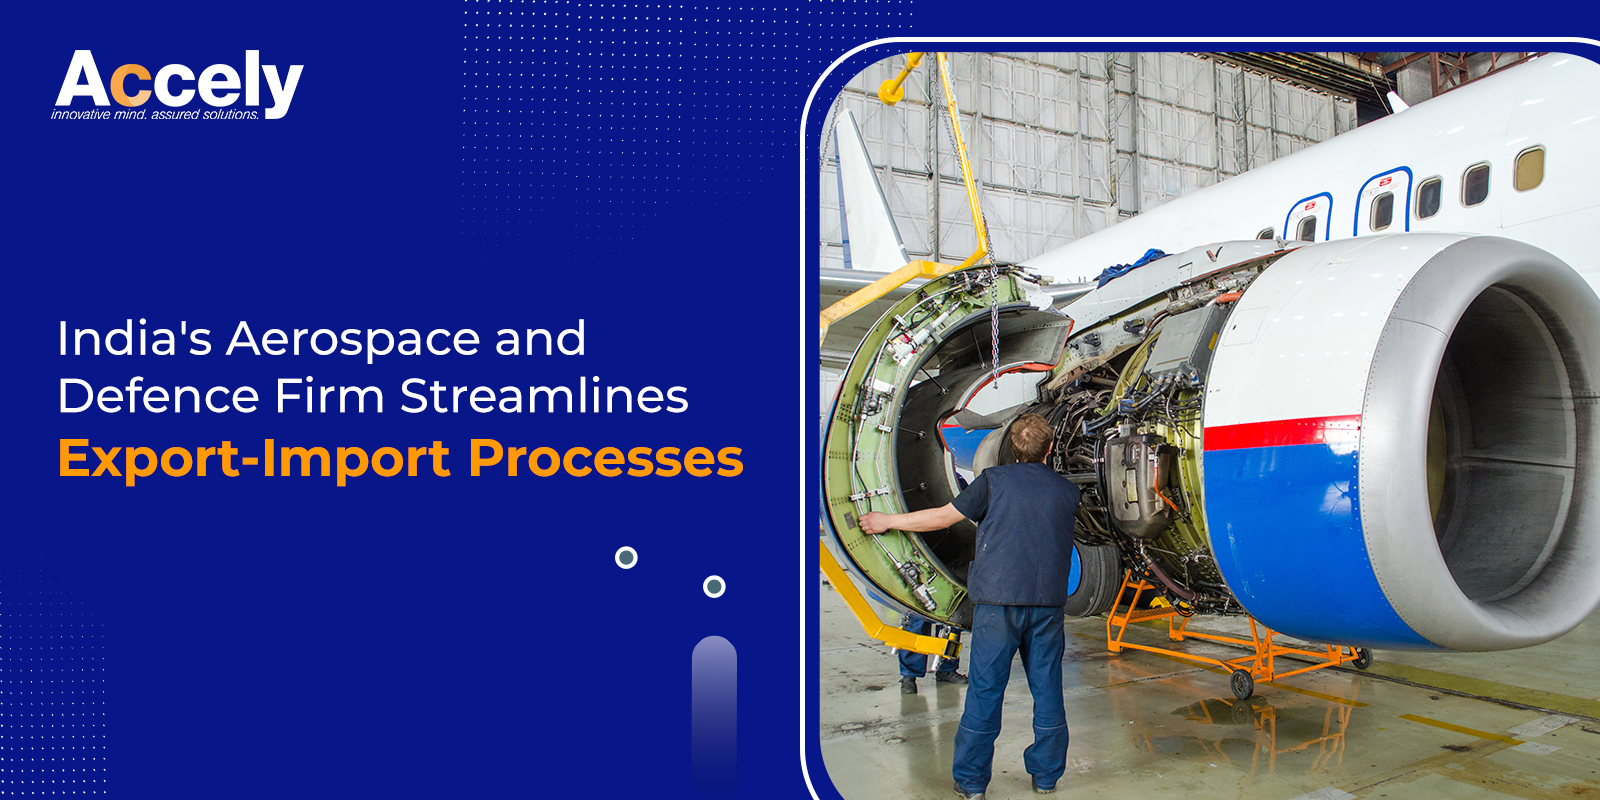 India's Aerospace and Defence Firm Streamlines Export-Import Processes